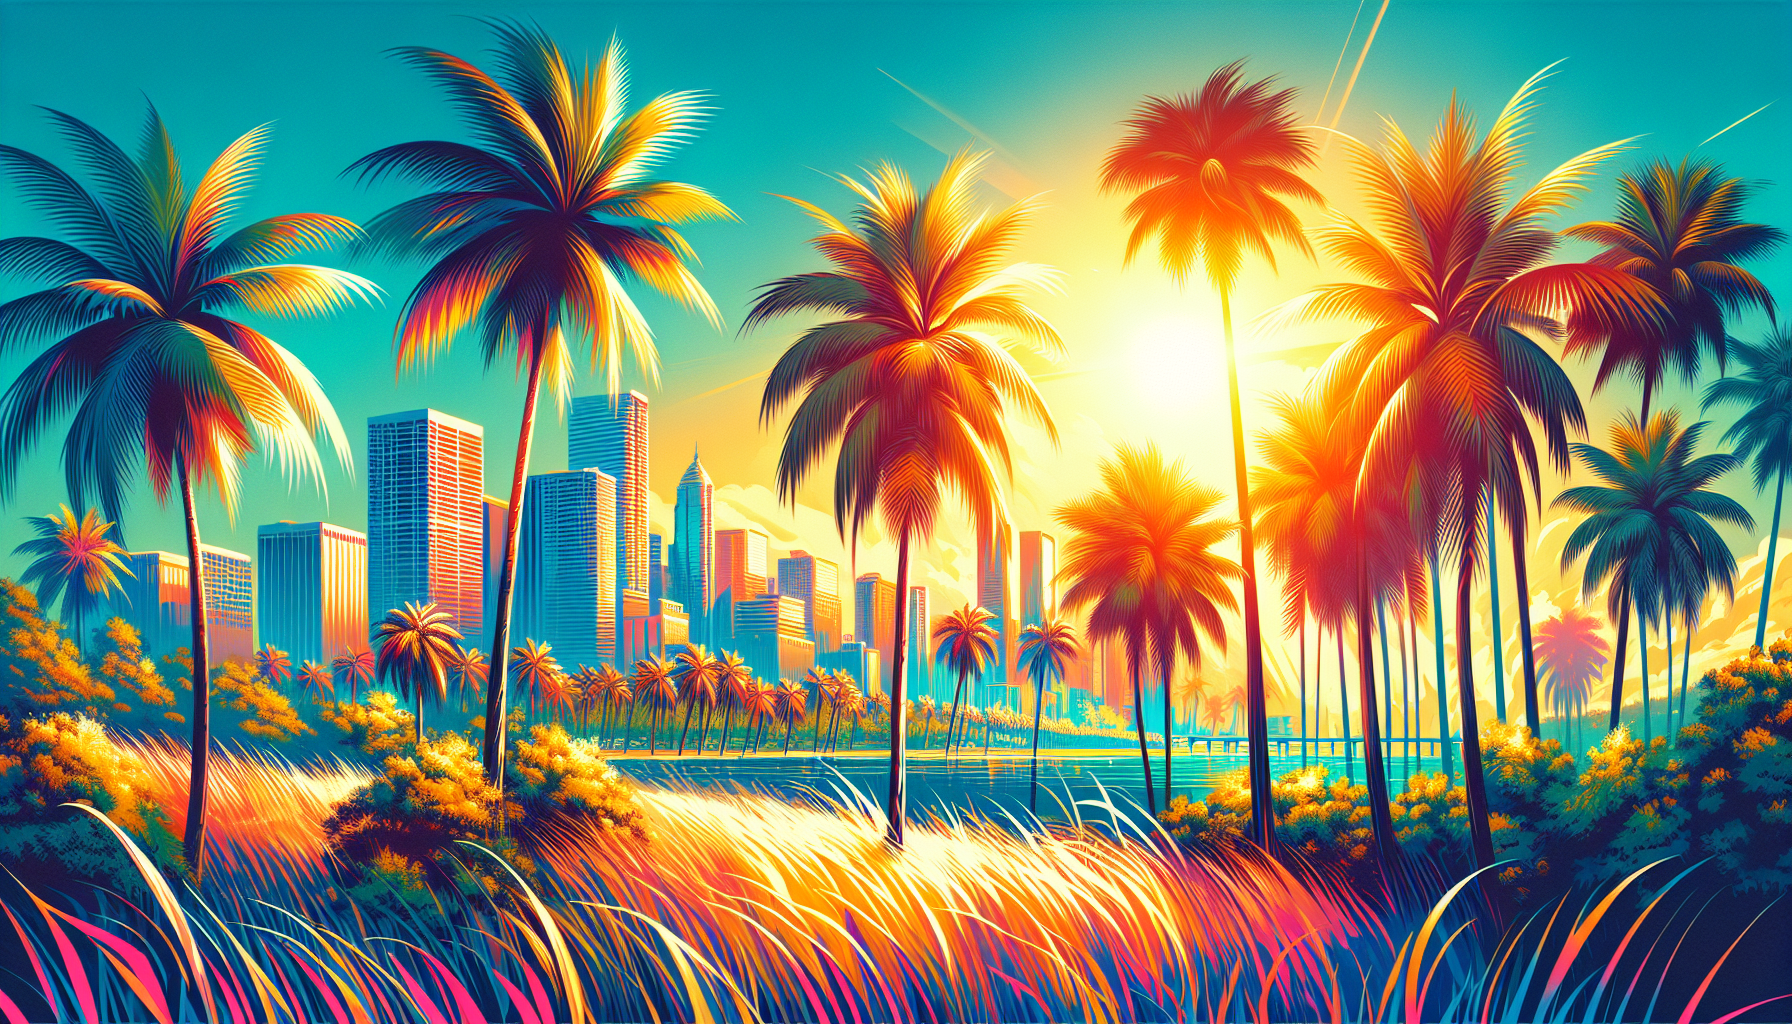 Illustration of a vibrant Florida landscape with palm trees and sunshine